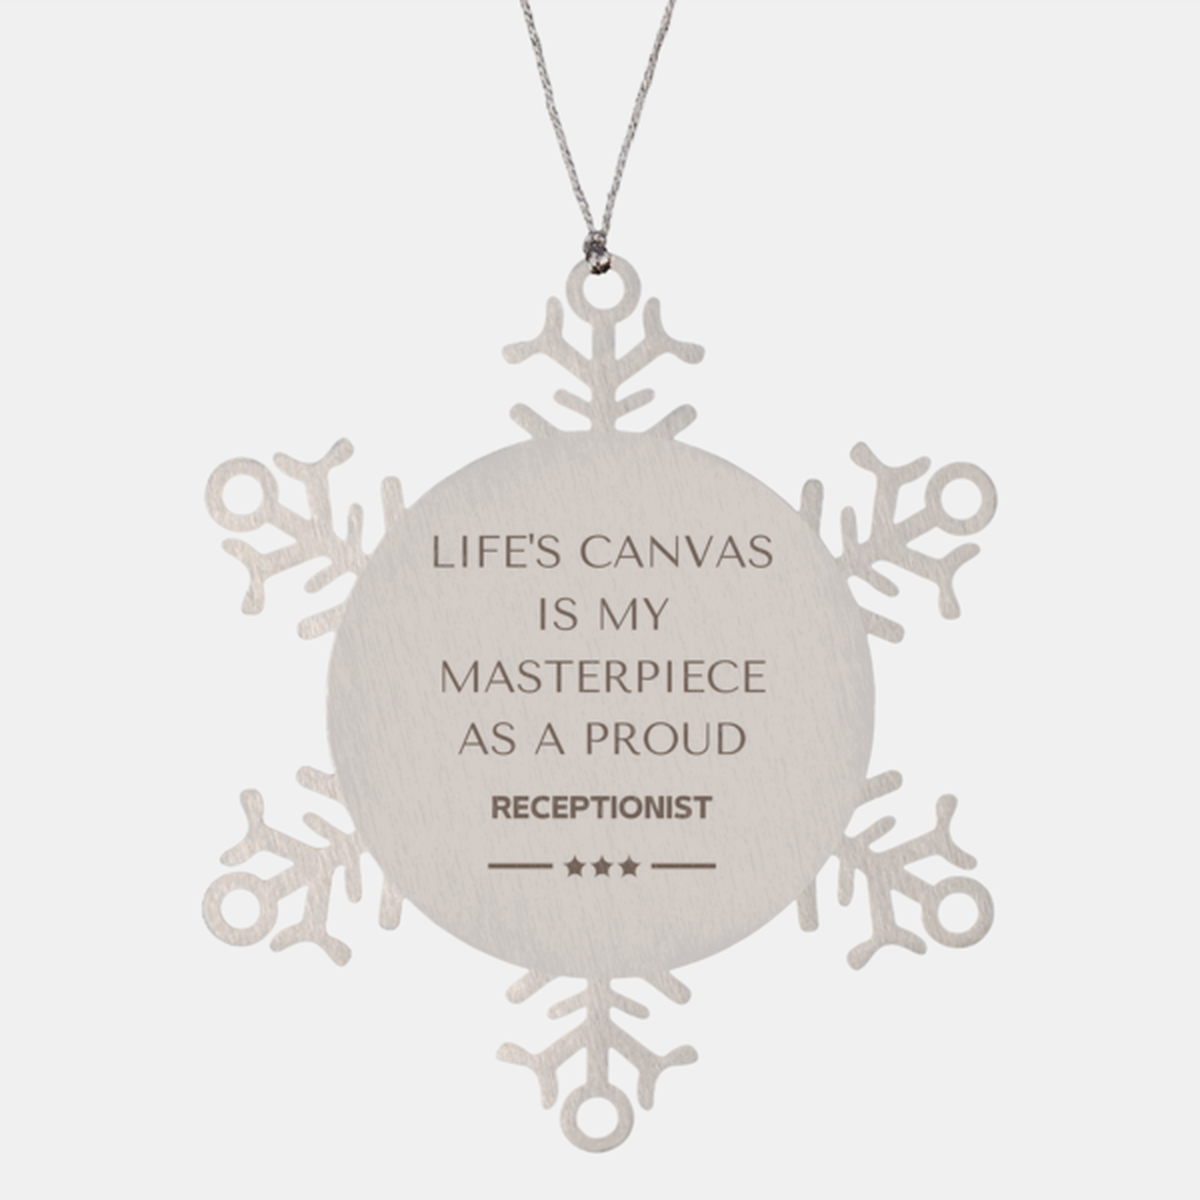 Proud Receptionist Gifts, Life's canvas is my masterpiece, Epic Birthday Christmas Unique Snowflake Ornament For Receptionist, Coworkers, Men, Women, Friends